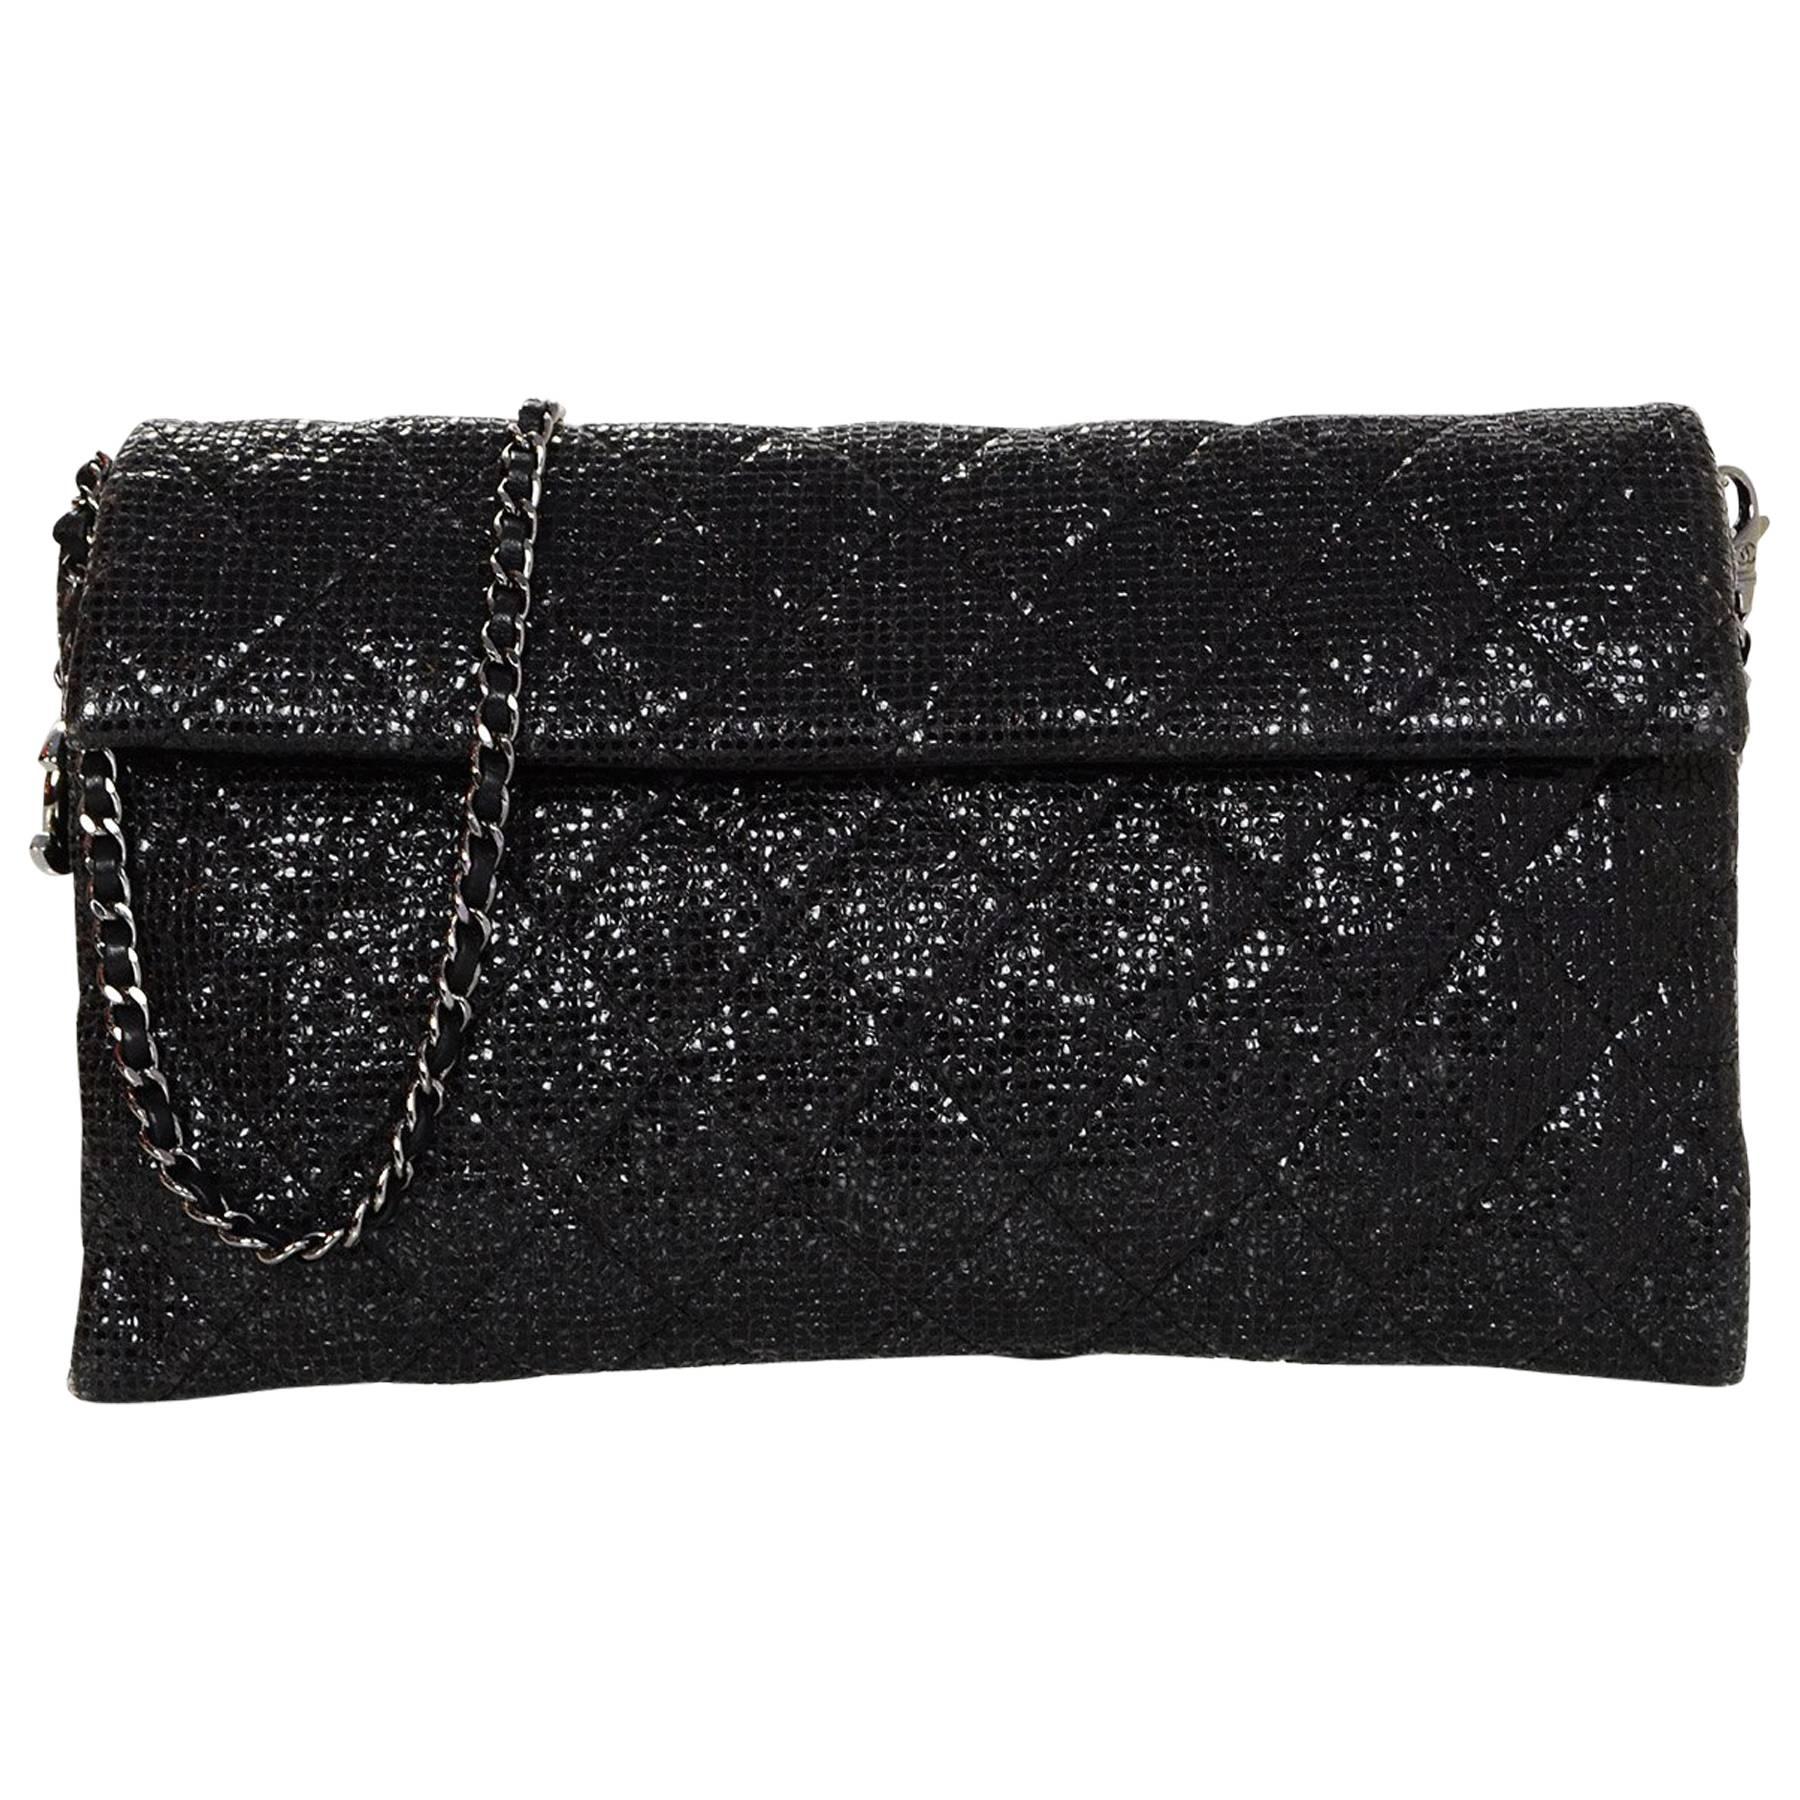 Chanel Black Glitter Quilted Crossbody/Clutch Bag with Box